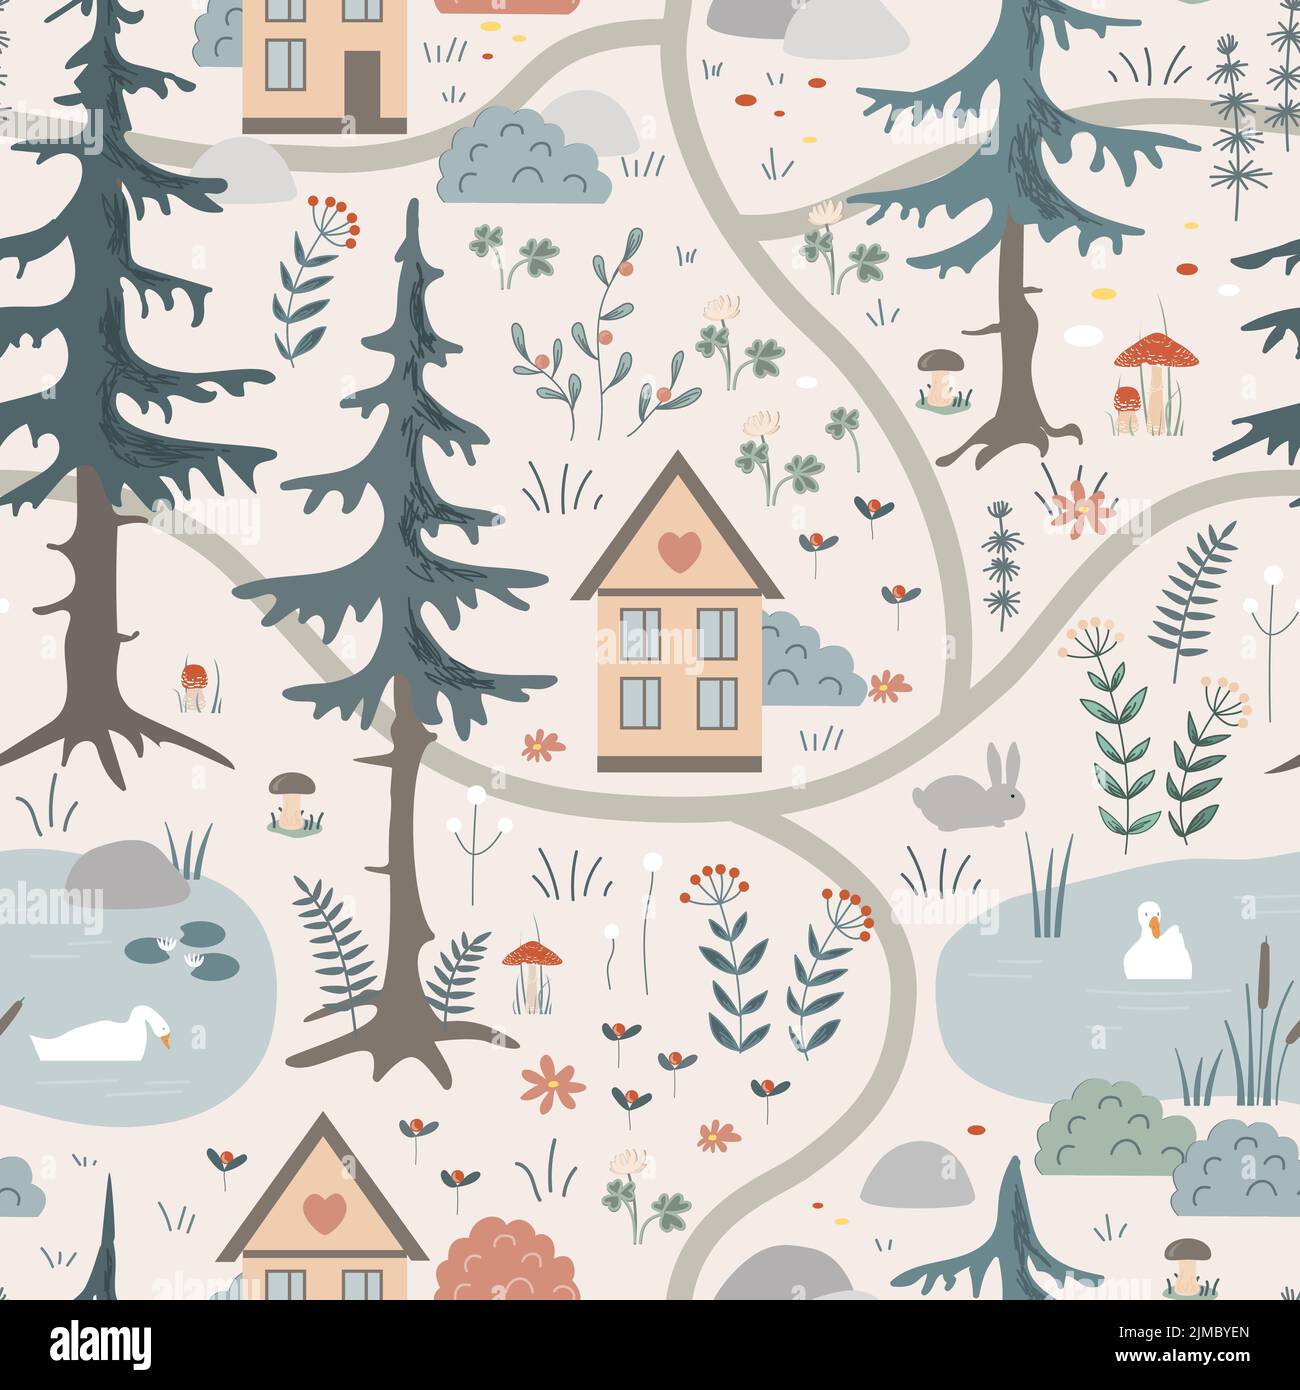 Cute seamless pattern with forest landscape elements. Cartoon animals, lake, houses, trees and flowers. Scandinavian vector background Stock Vector